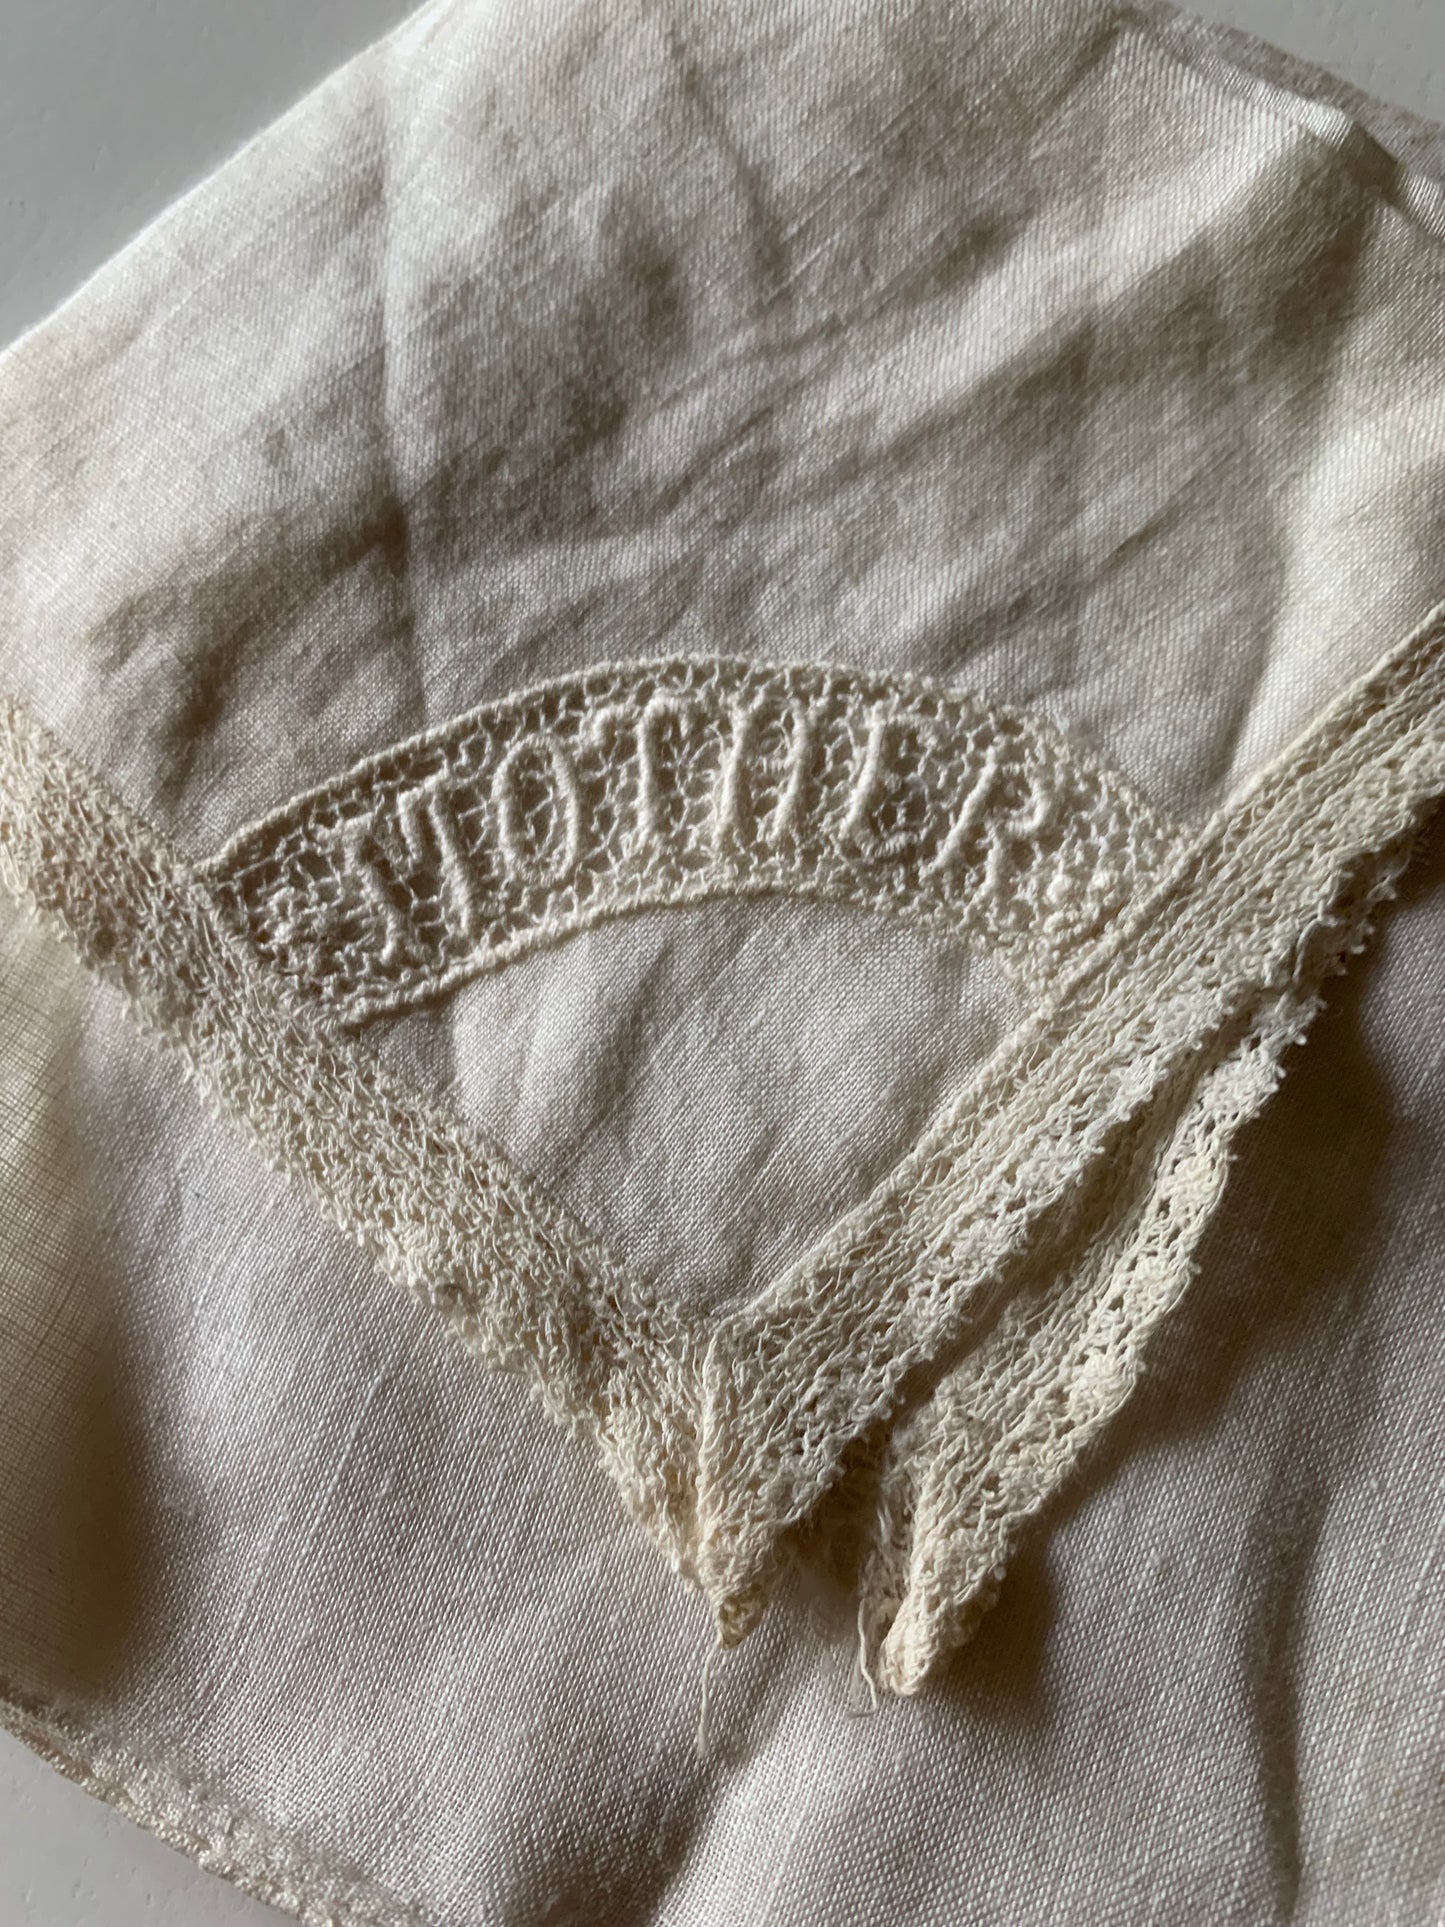 "Mother" Embroidered Cotton Voile Handkerchief Set 2 circa 1940s